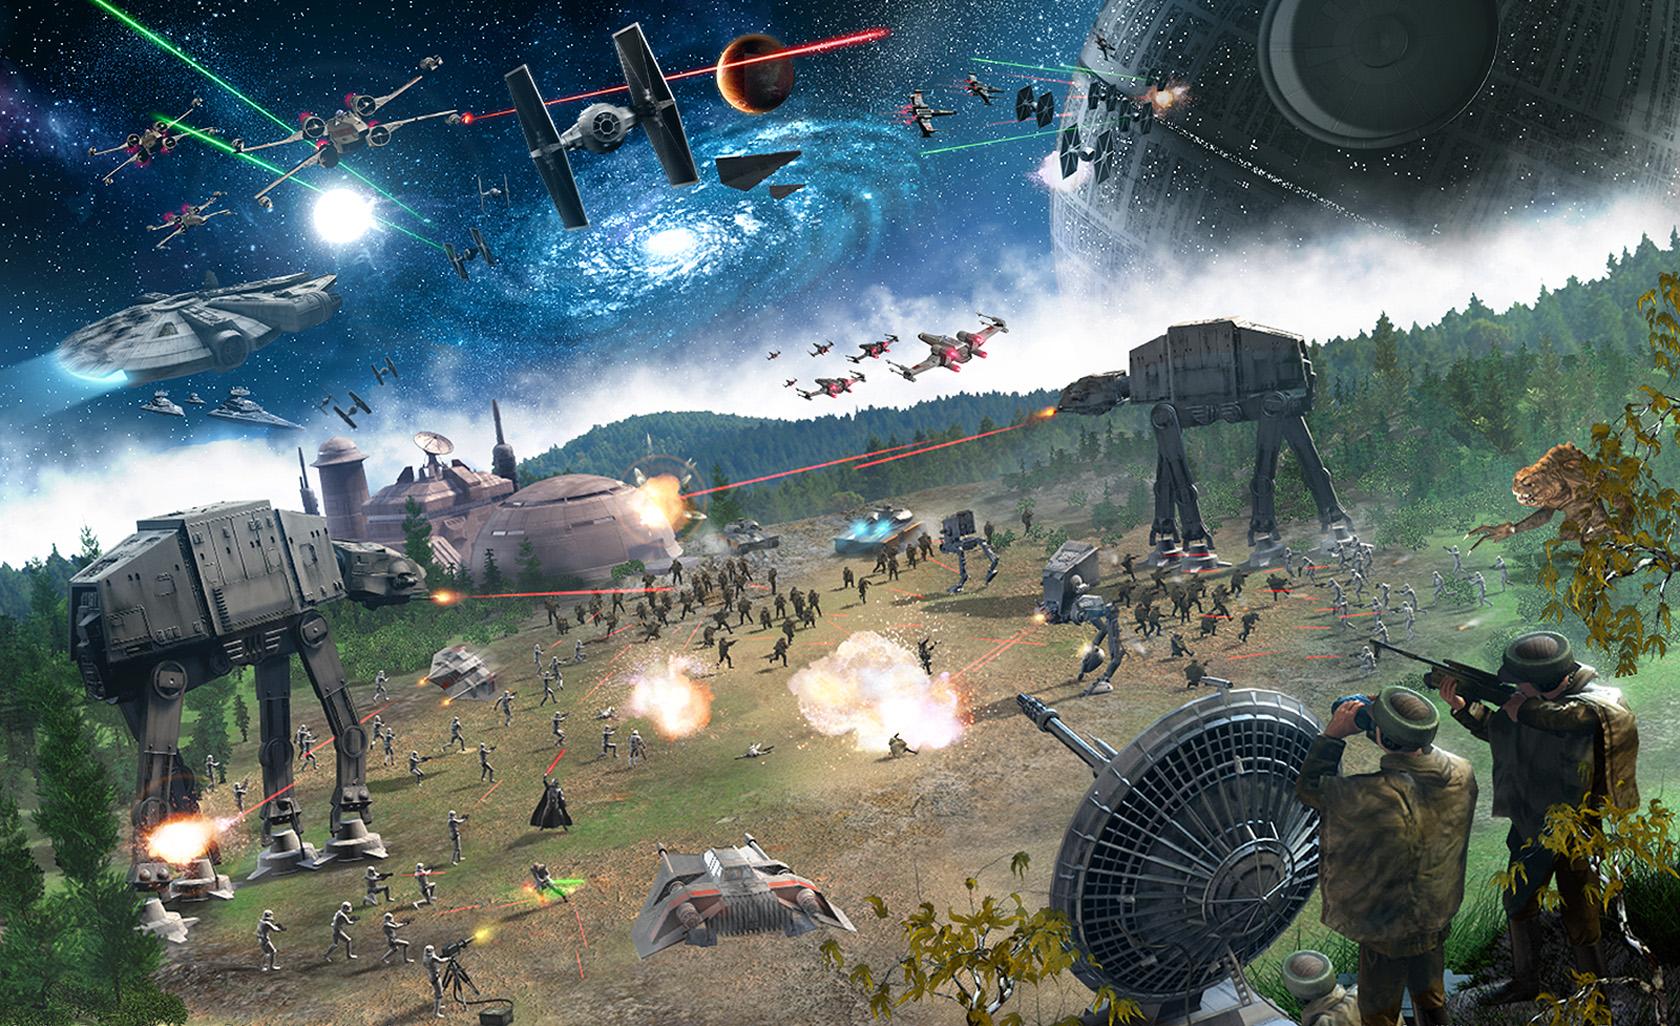 Star Wars Empire At War Forces Of Corruption Patch 1.1